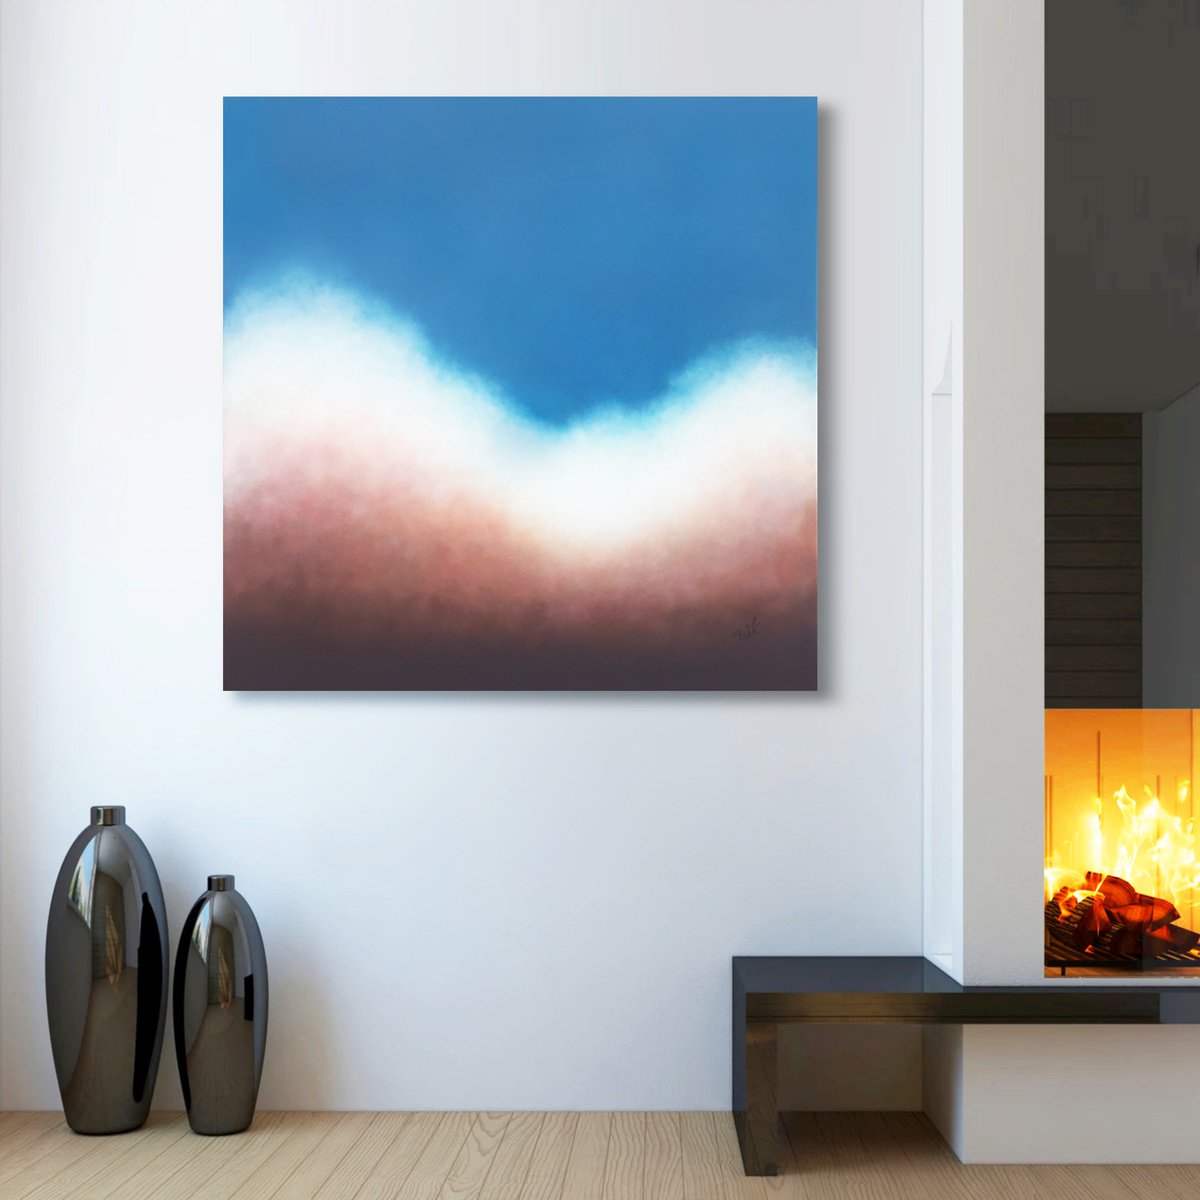 Abstract Landscape III - Oil Painting on Linen Canvas 100A�100 cm by Waldemar Kaliczak